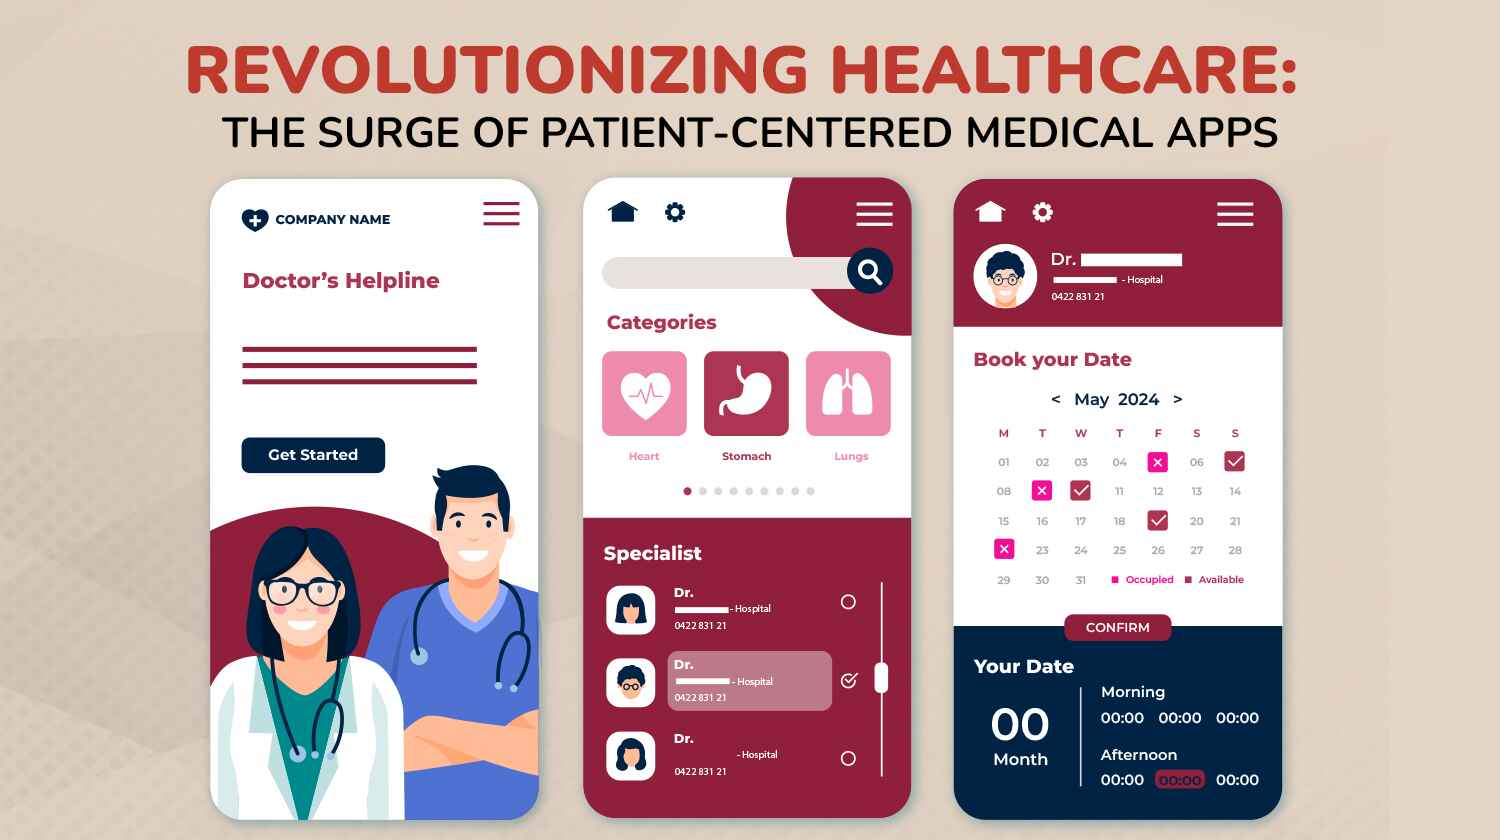 The Surge of Patient-Centered Medical Apps